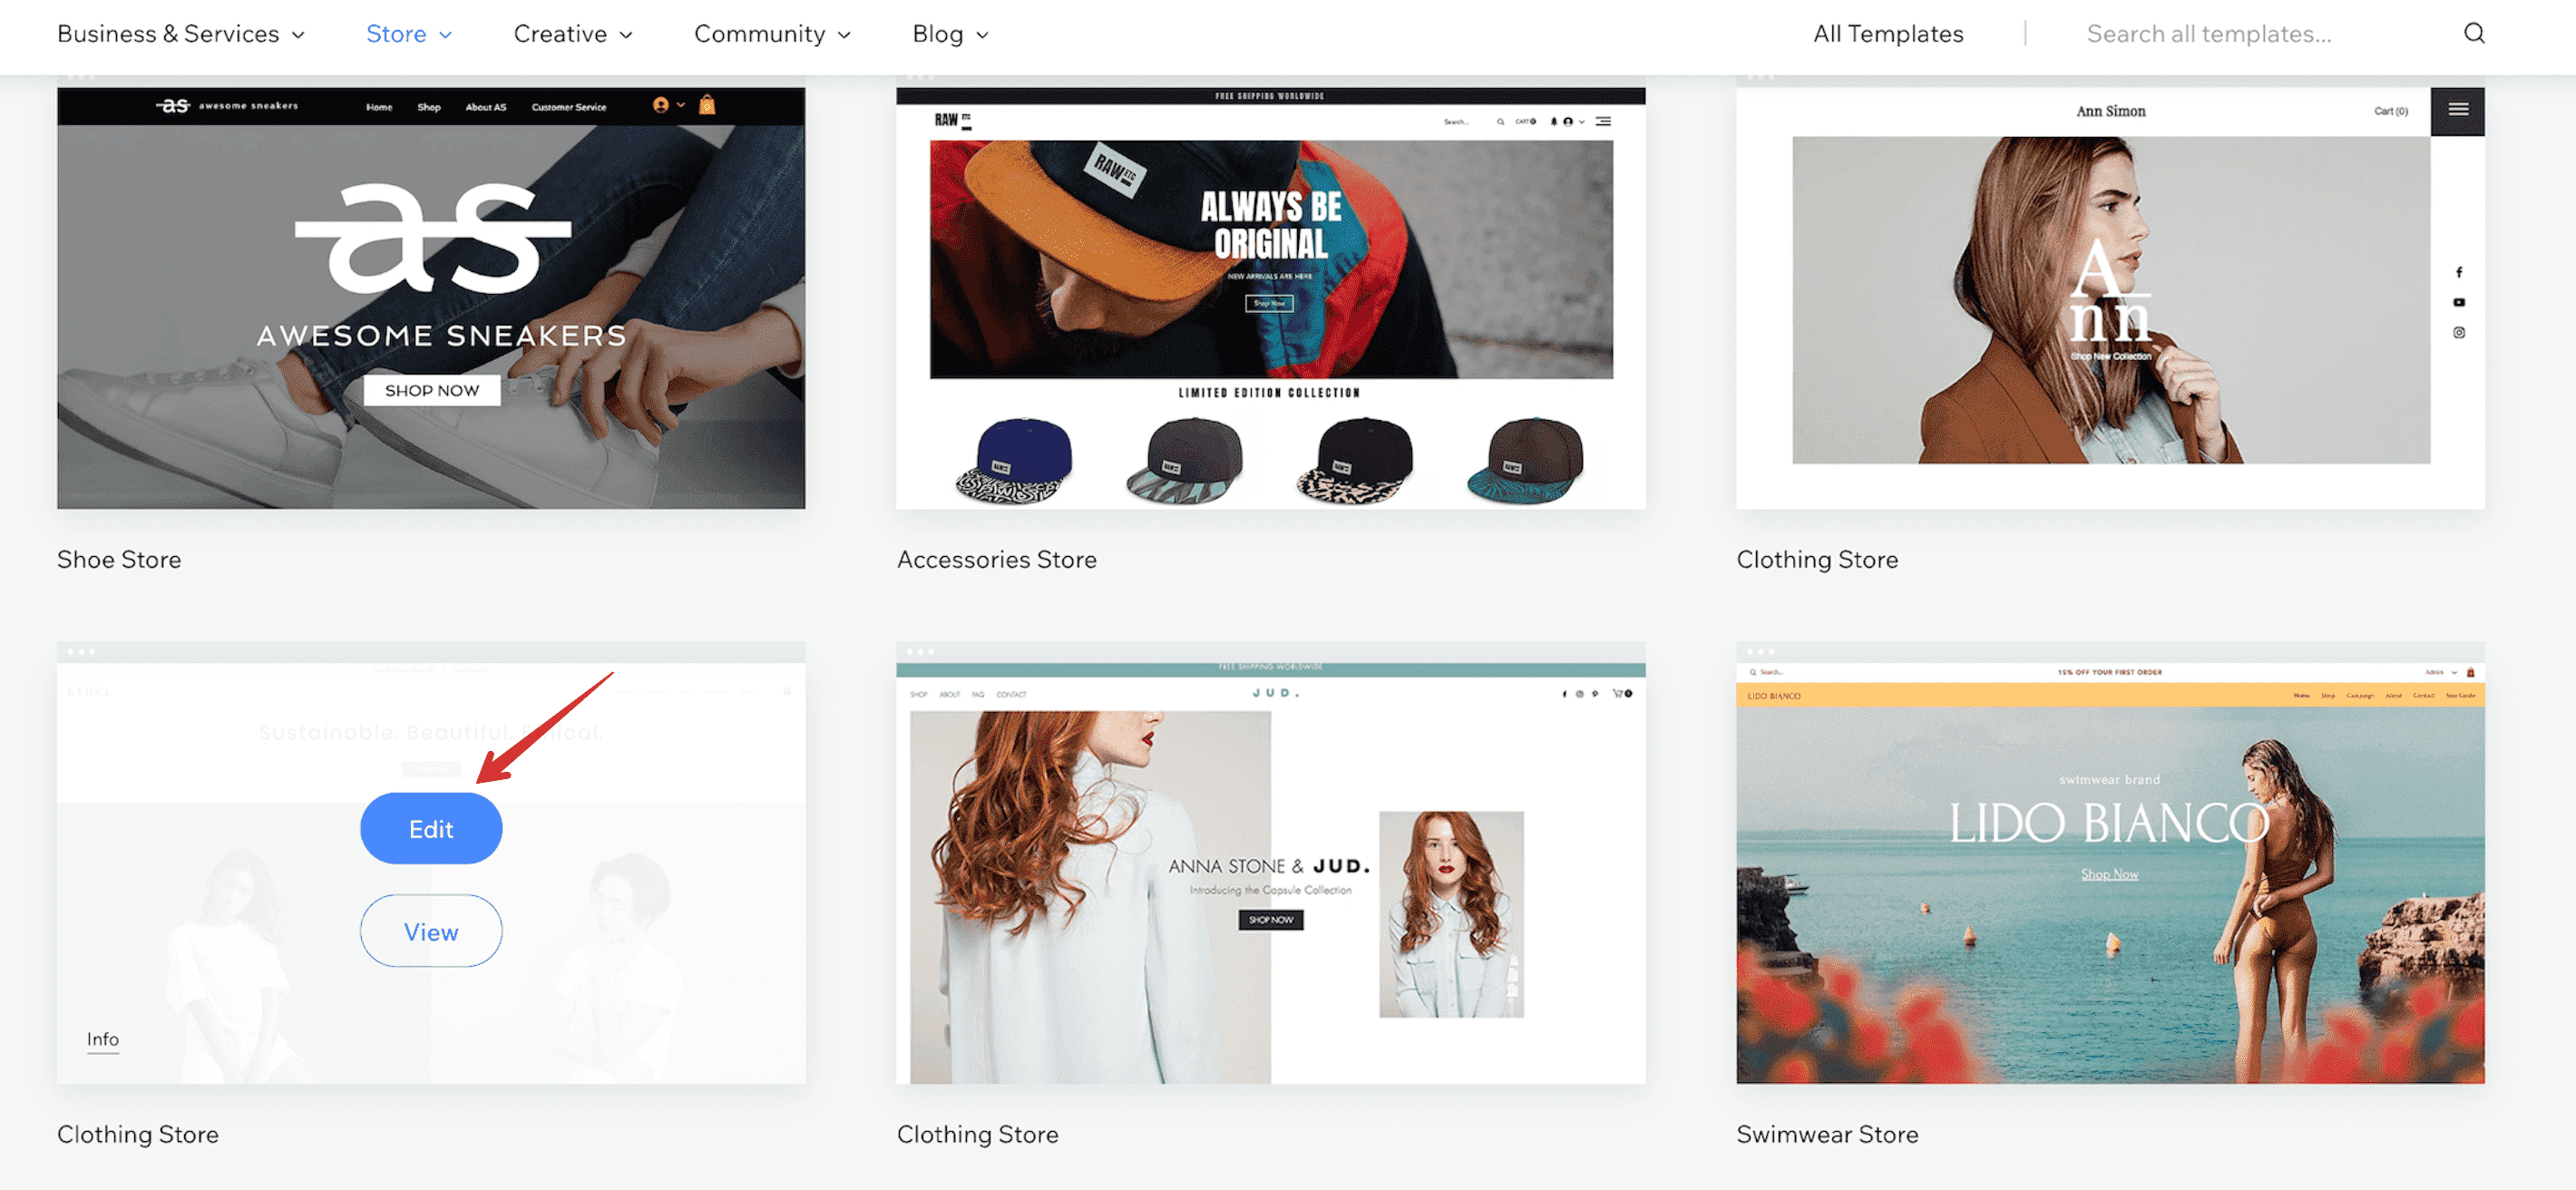 List of Wix templates